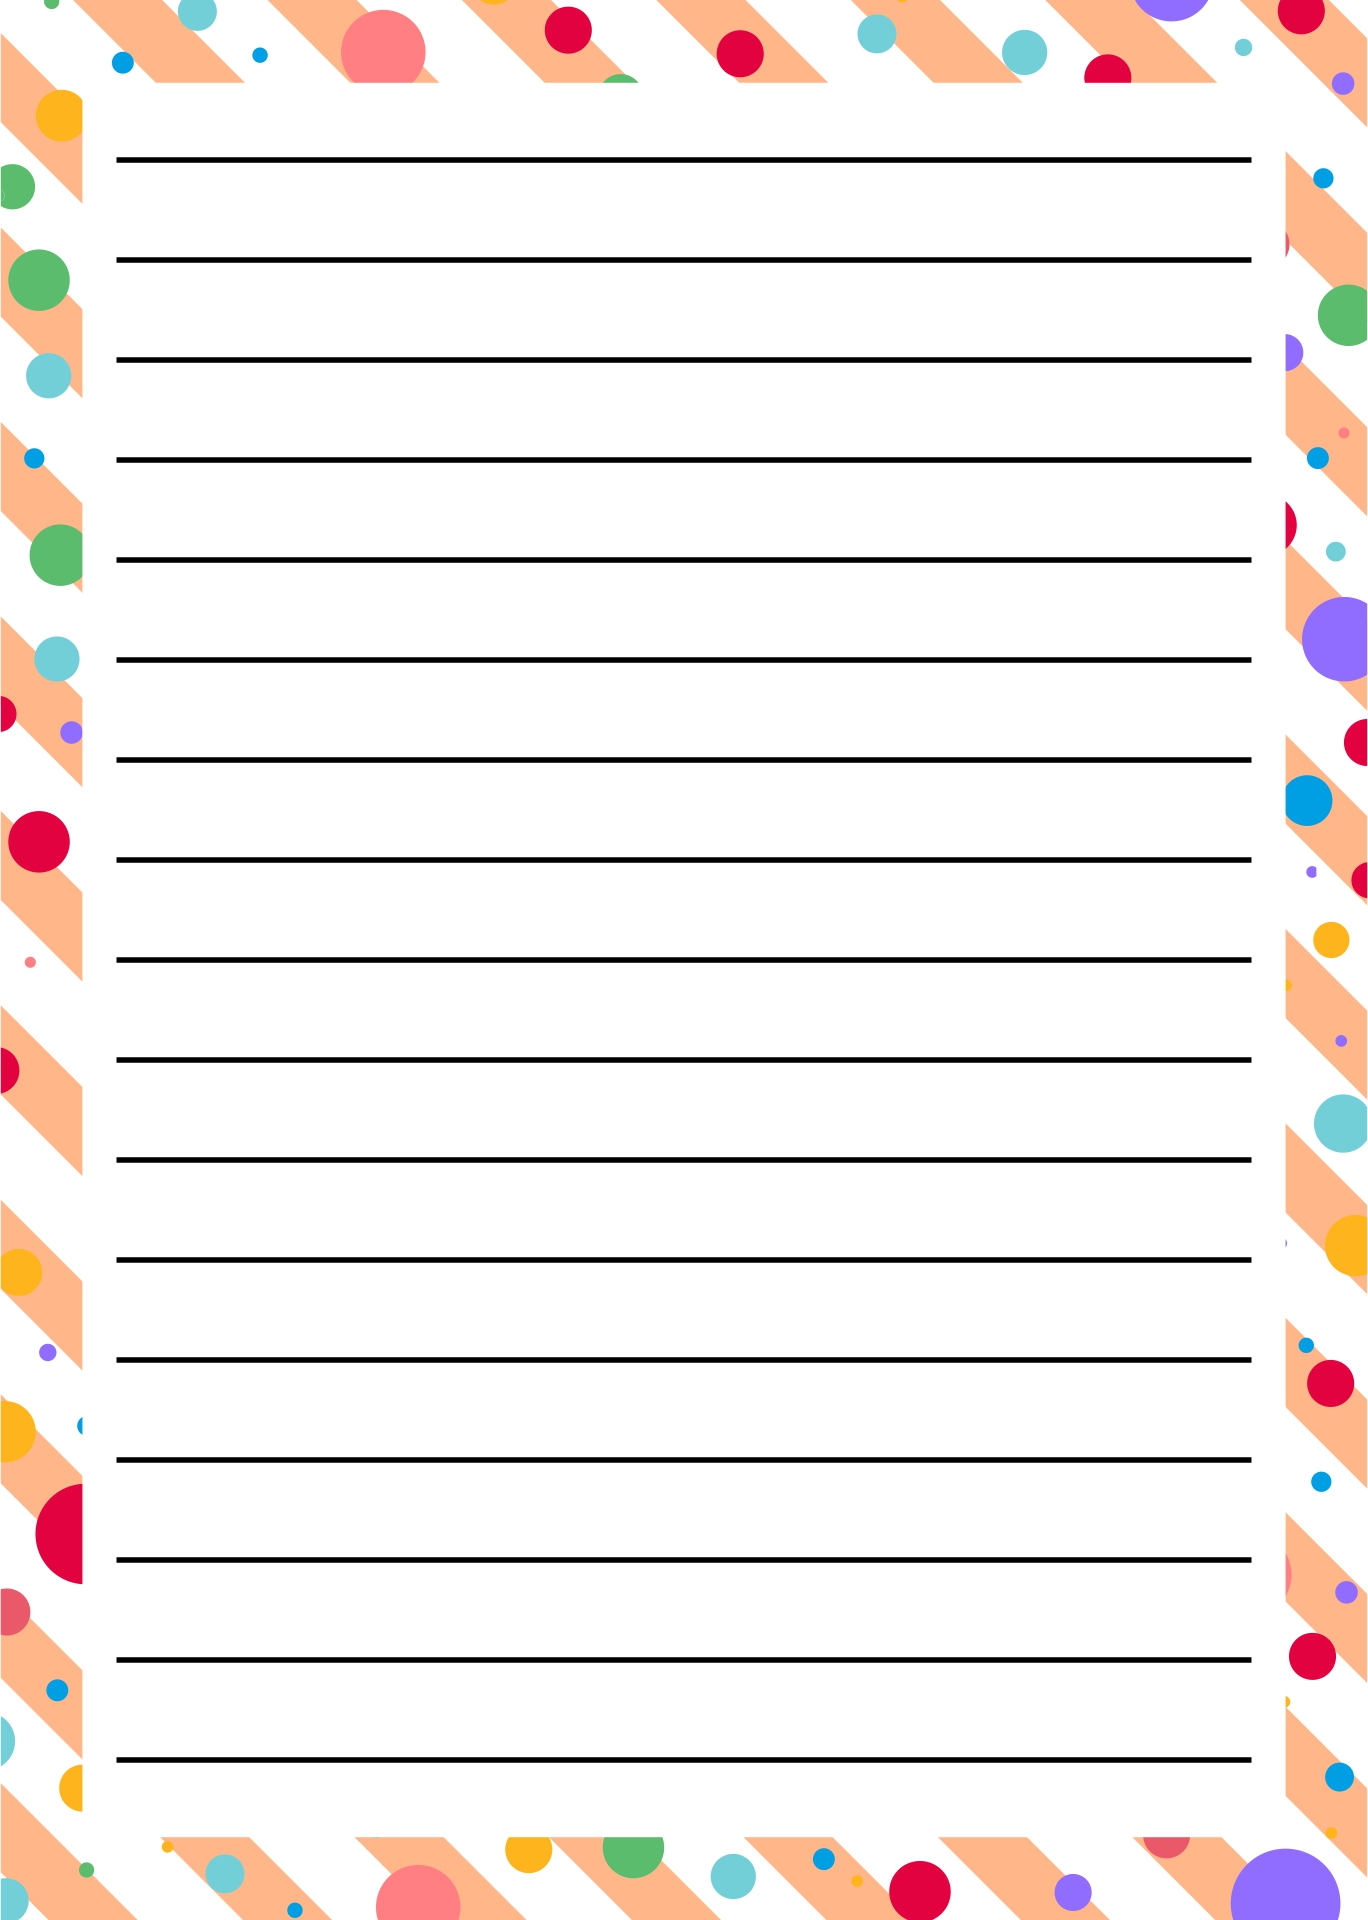 Jungle & Rainforest Border Writing Paper | Primary Resources